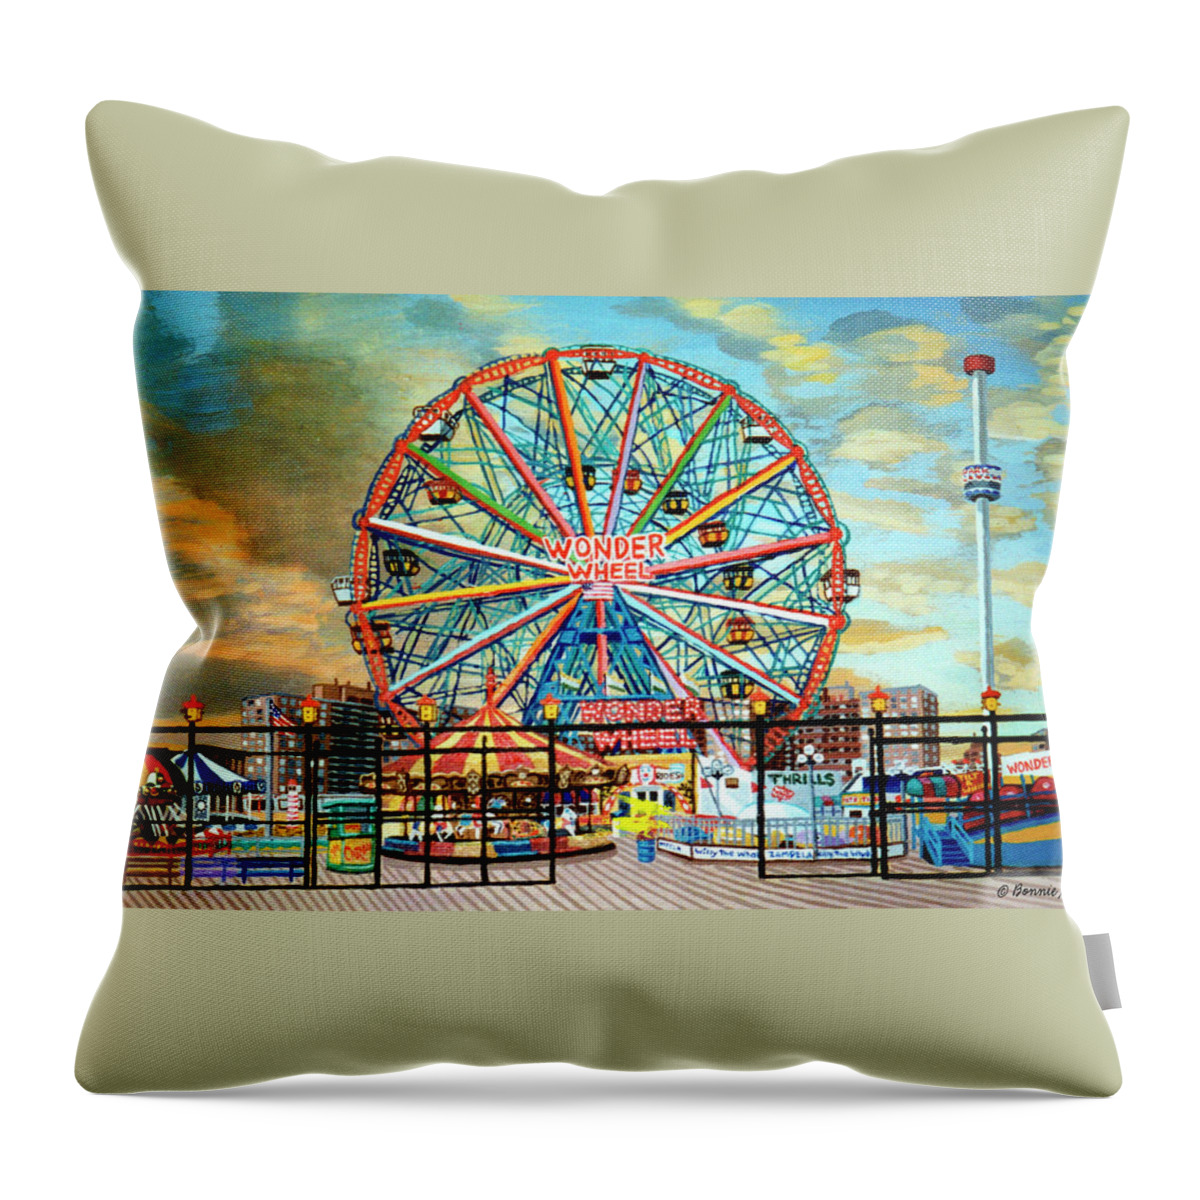  Throw Pillow featuring the painting Wonder Wheel by Bonnie Siracusa